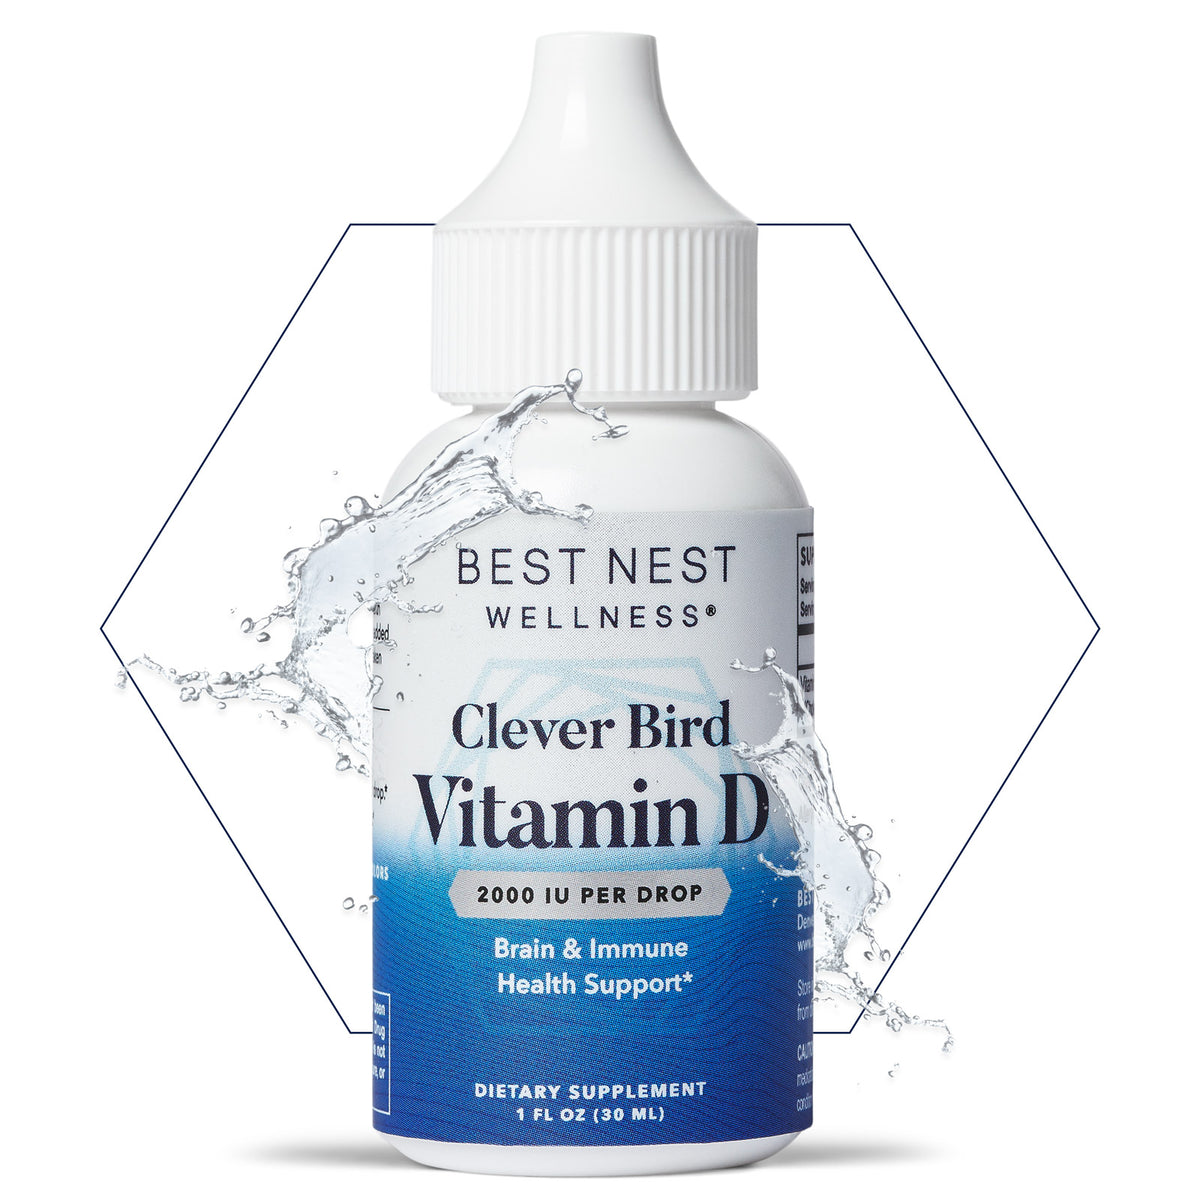 Vitamin D Drops bottle with 2000 IU per drop, plastic bottle with white cap and black text.